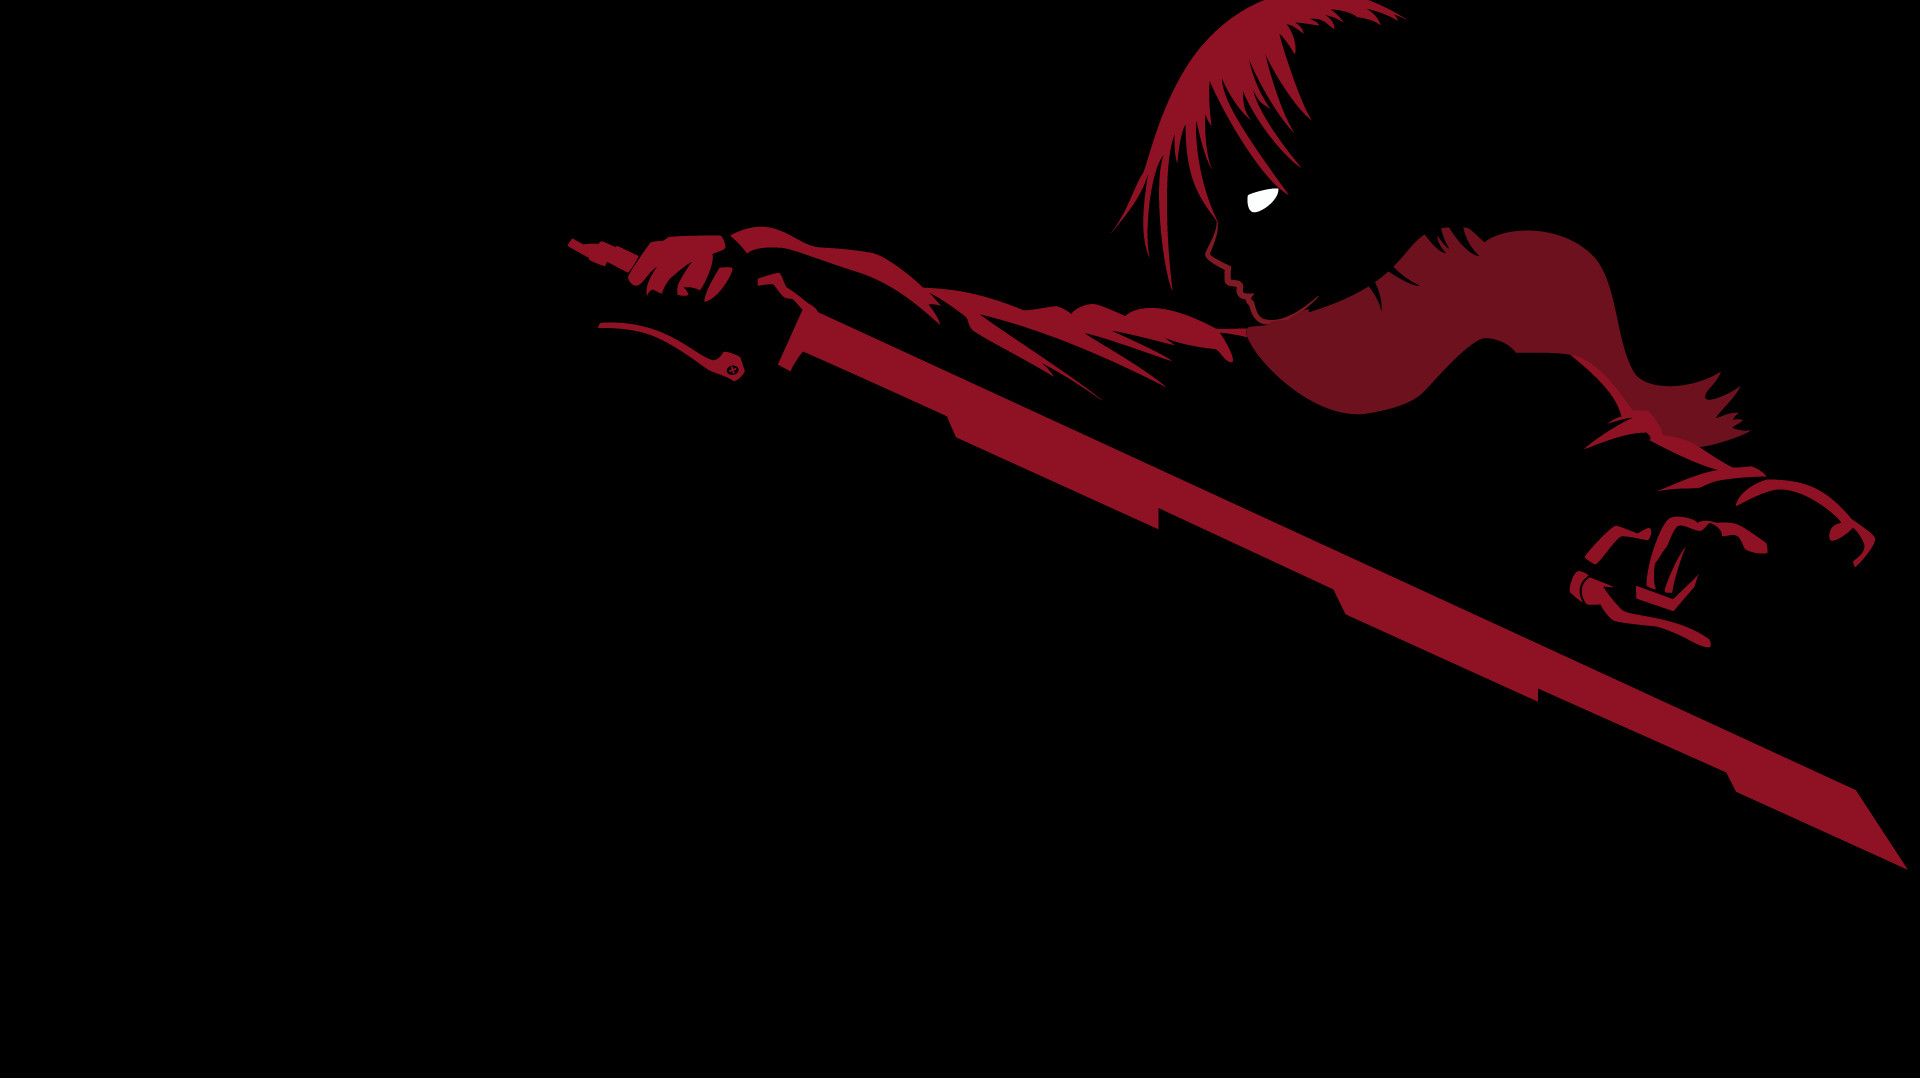 18444 Anime Red Background Images Stock Photos  Vectors  Shutterstock